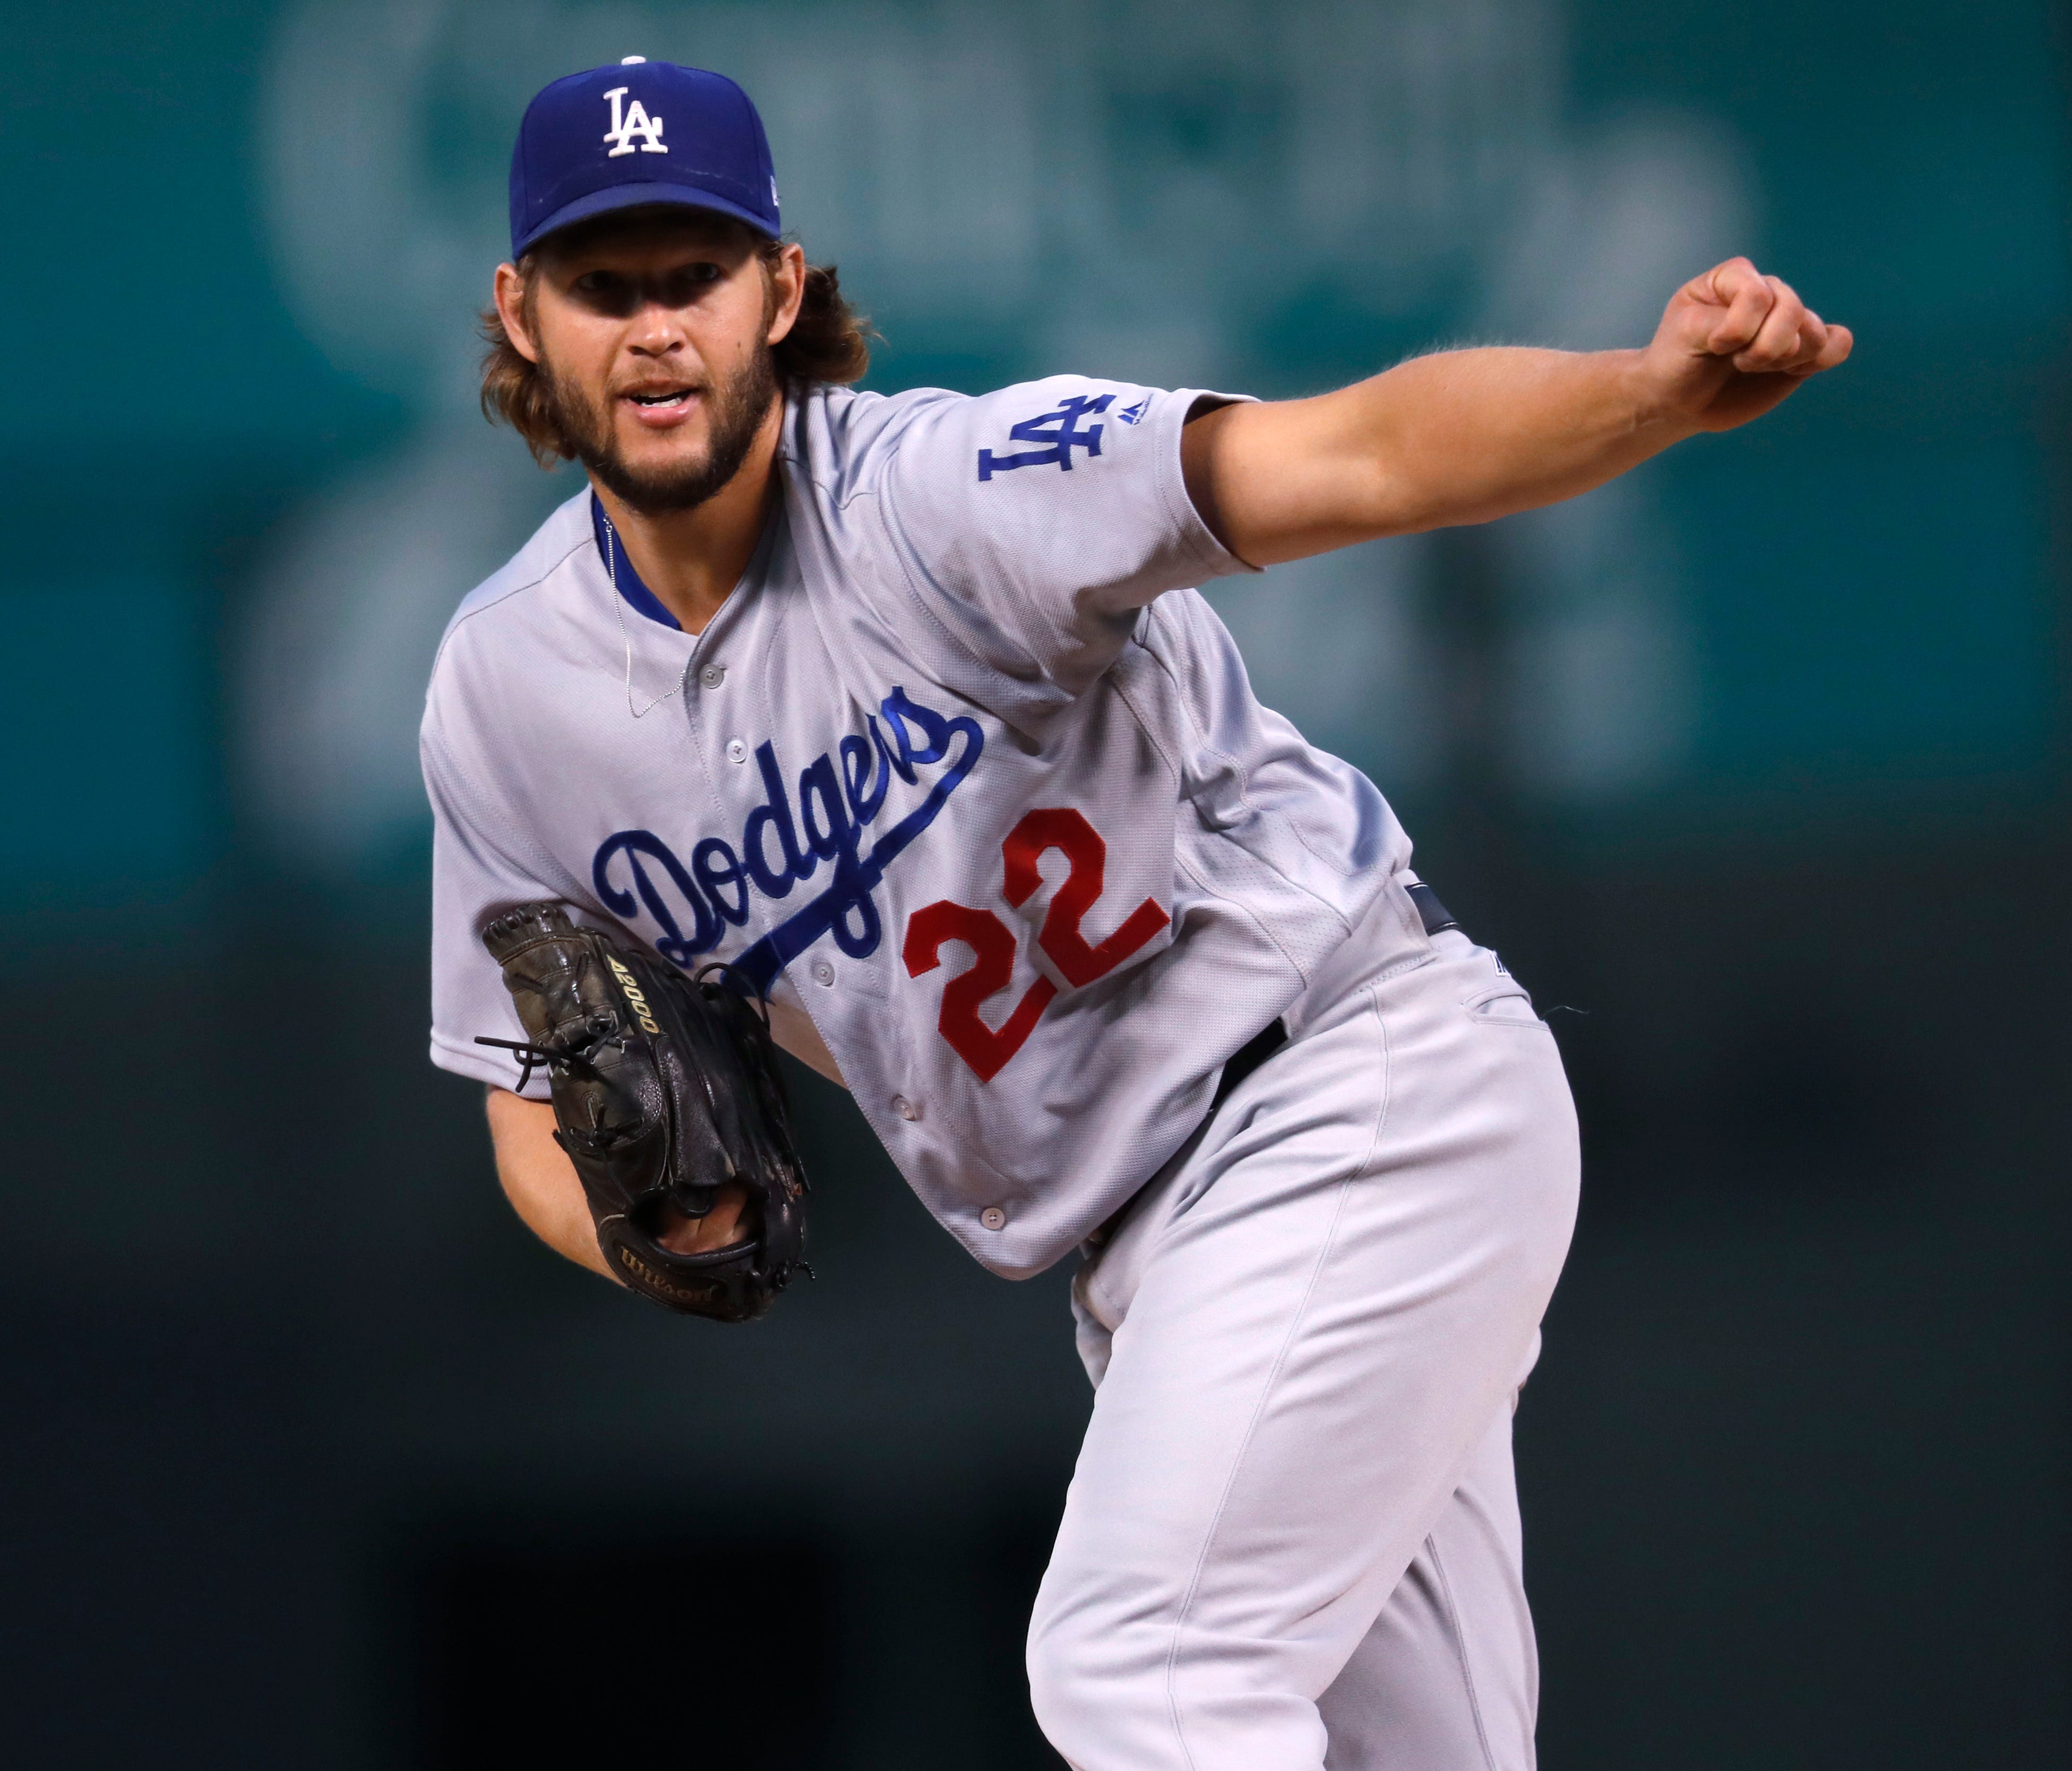 Clayton Kershaw led the NL with a 2.31 ERA.